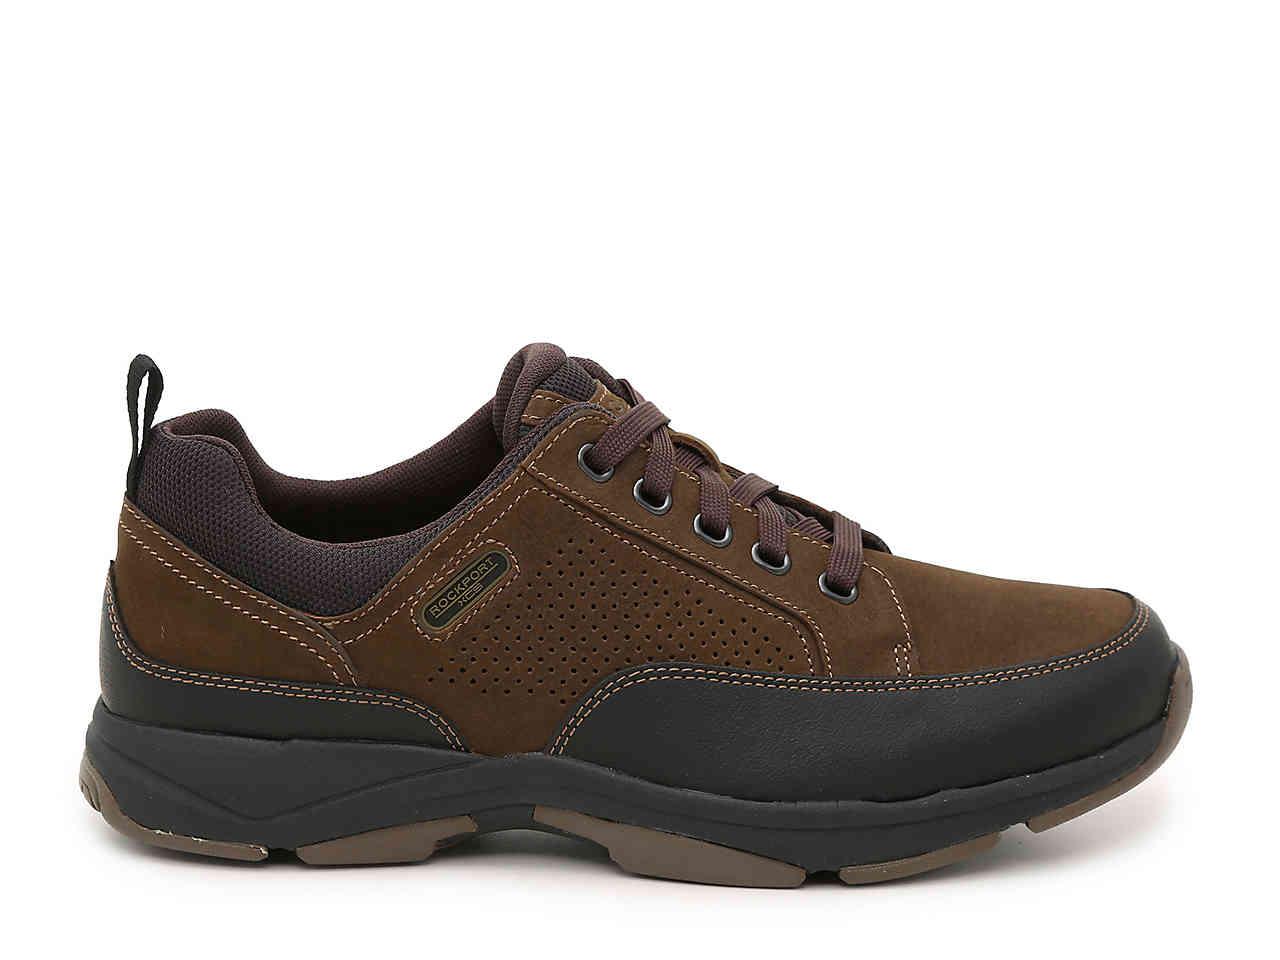 Rockport Lace To Toe Trail Shoe in Dark Brown/Black (Brown) for Men - Lyst